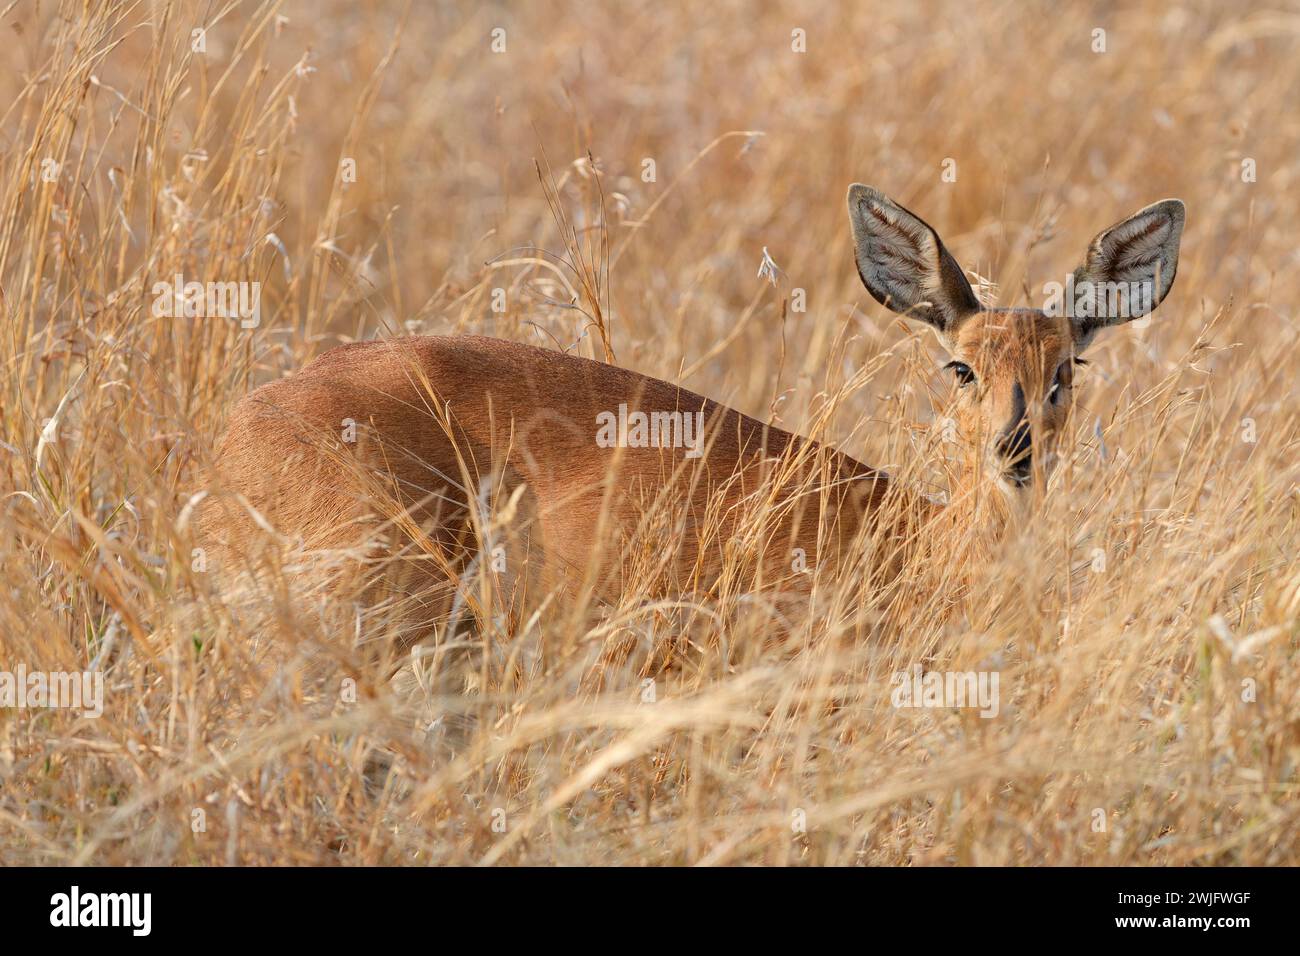 Steenbok (Raphicerus campestris), adult female standing in tall dry grass, looking at camera, alert, Kruger National Park, South Africa, Africa Stock Photo